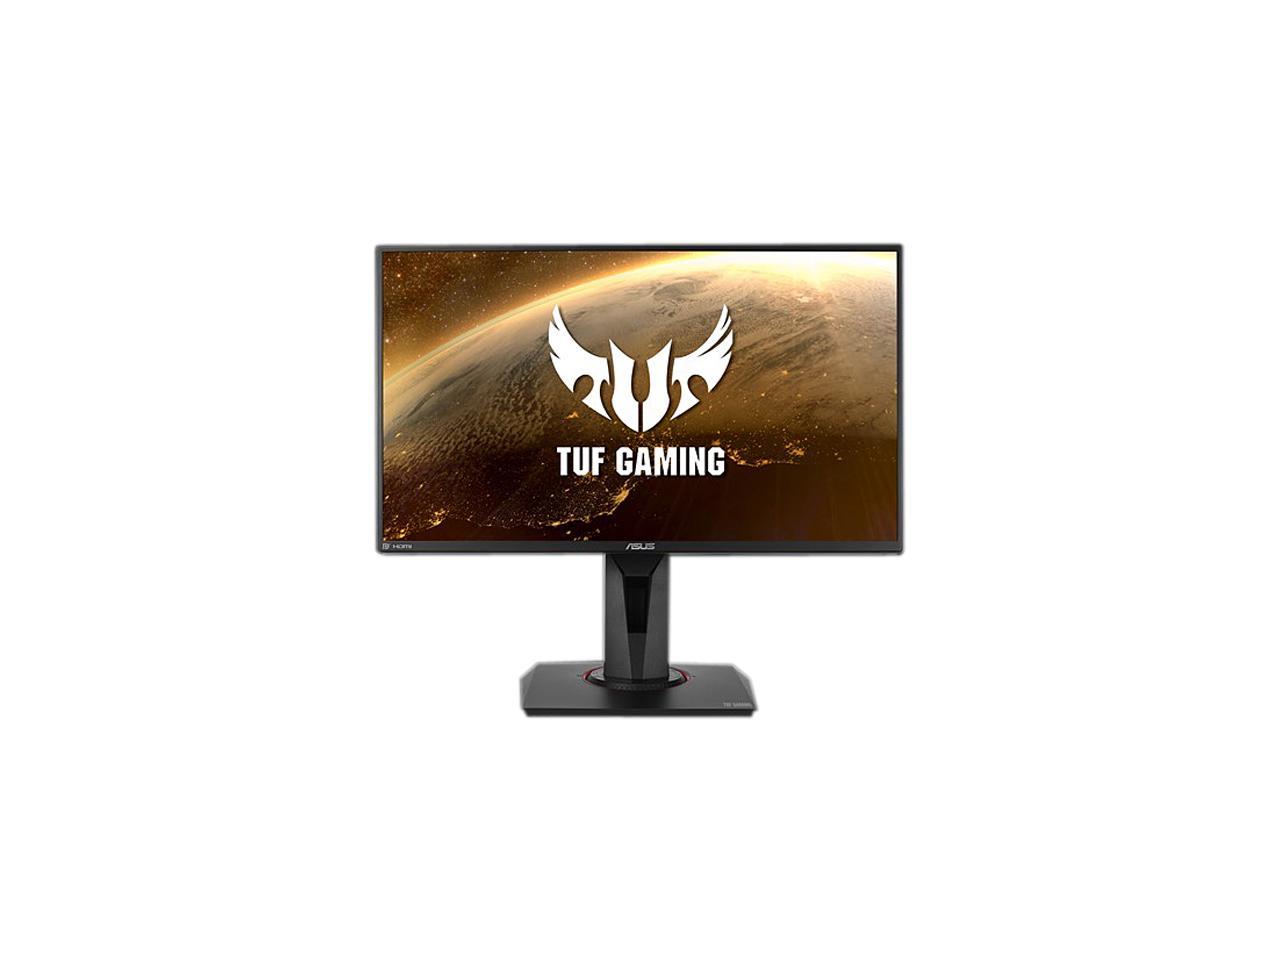 ASUS TUF Gaming VG259QR 25" (24.5" Viewable) IPS Monitor, 1080P FHD 165Hz (Supports 144Hz) 1ms Extreme Low Motion Blur G-SYNC Compatible ready Eye Care 2 x HDMI DisplayPort